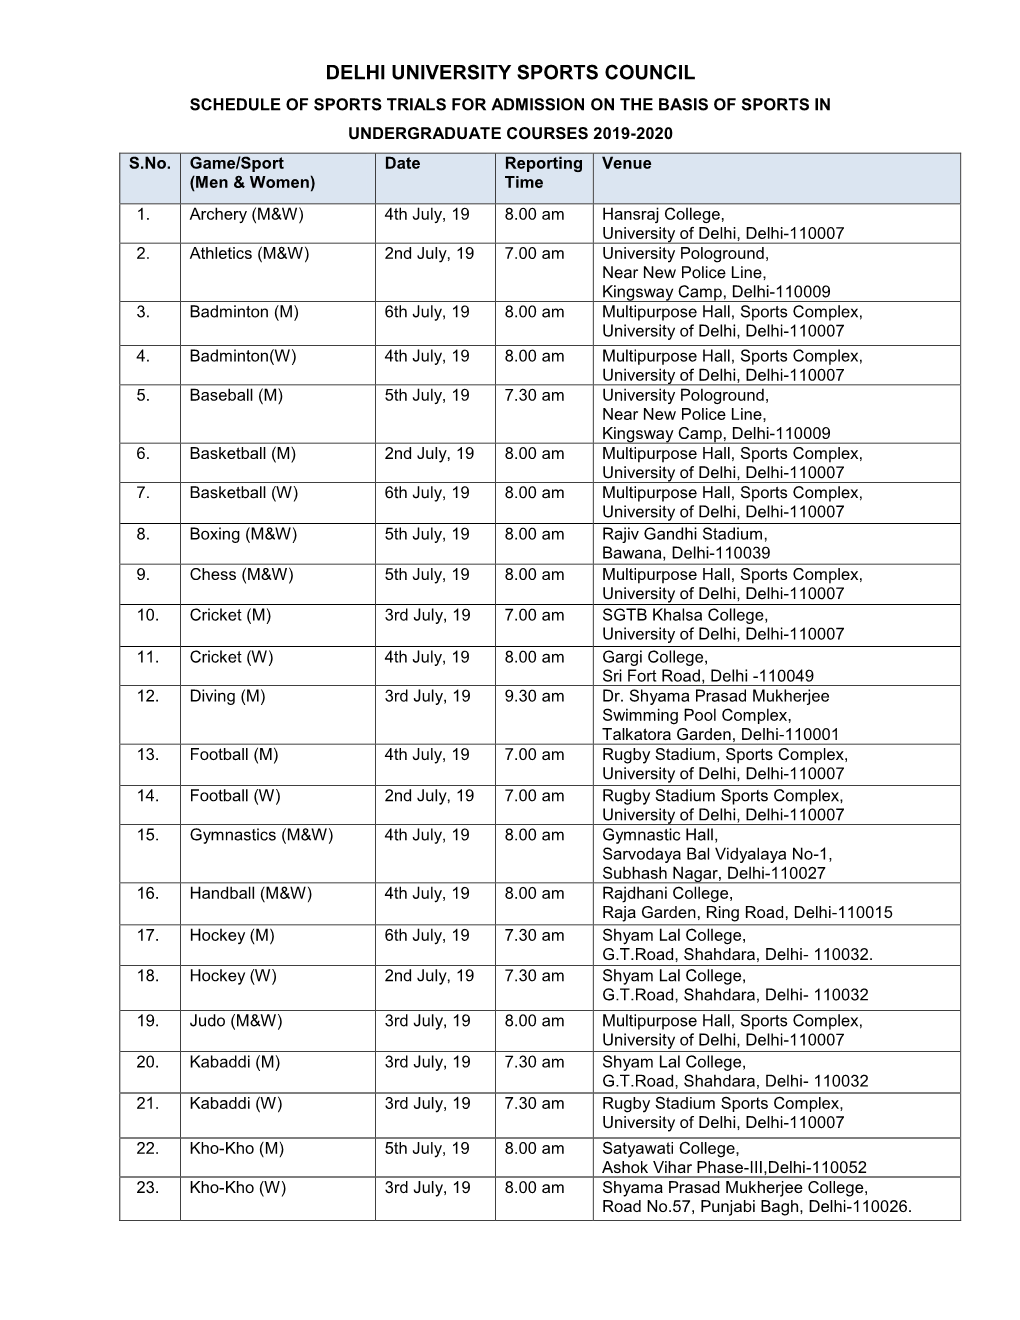 DU Sports Trial Schedule for the 2019-20